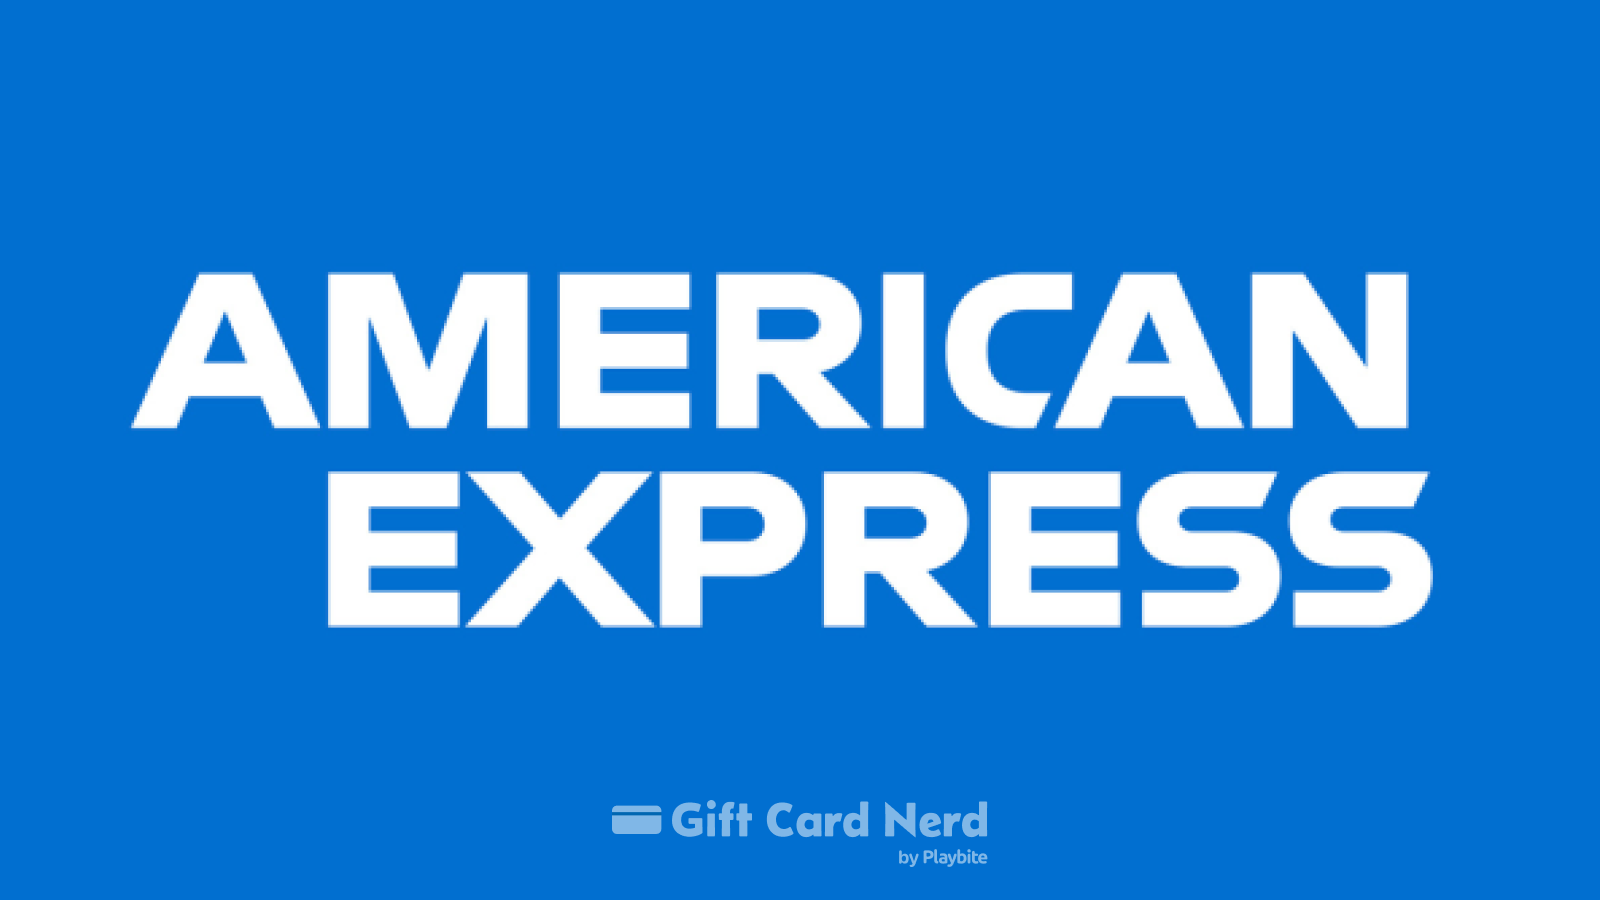 Can I Use an Amex Gift Card on Steam?